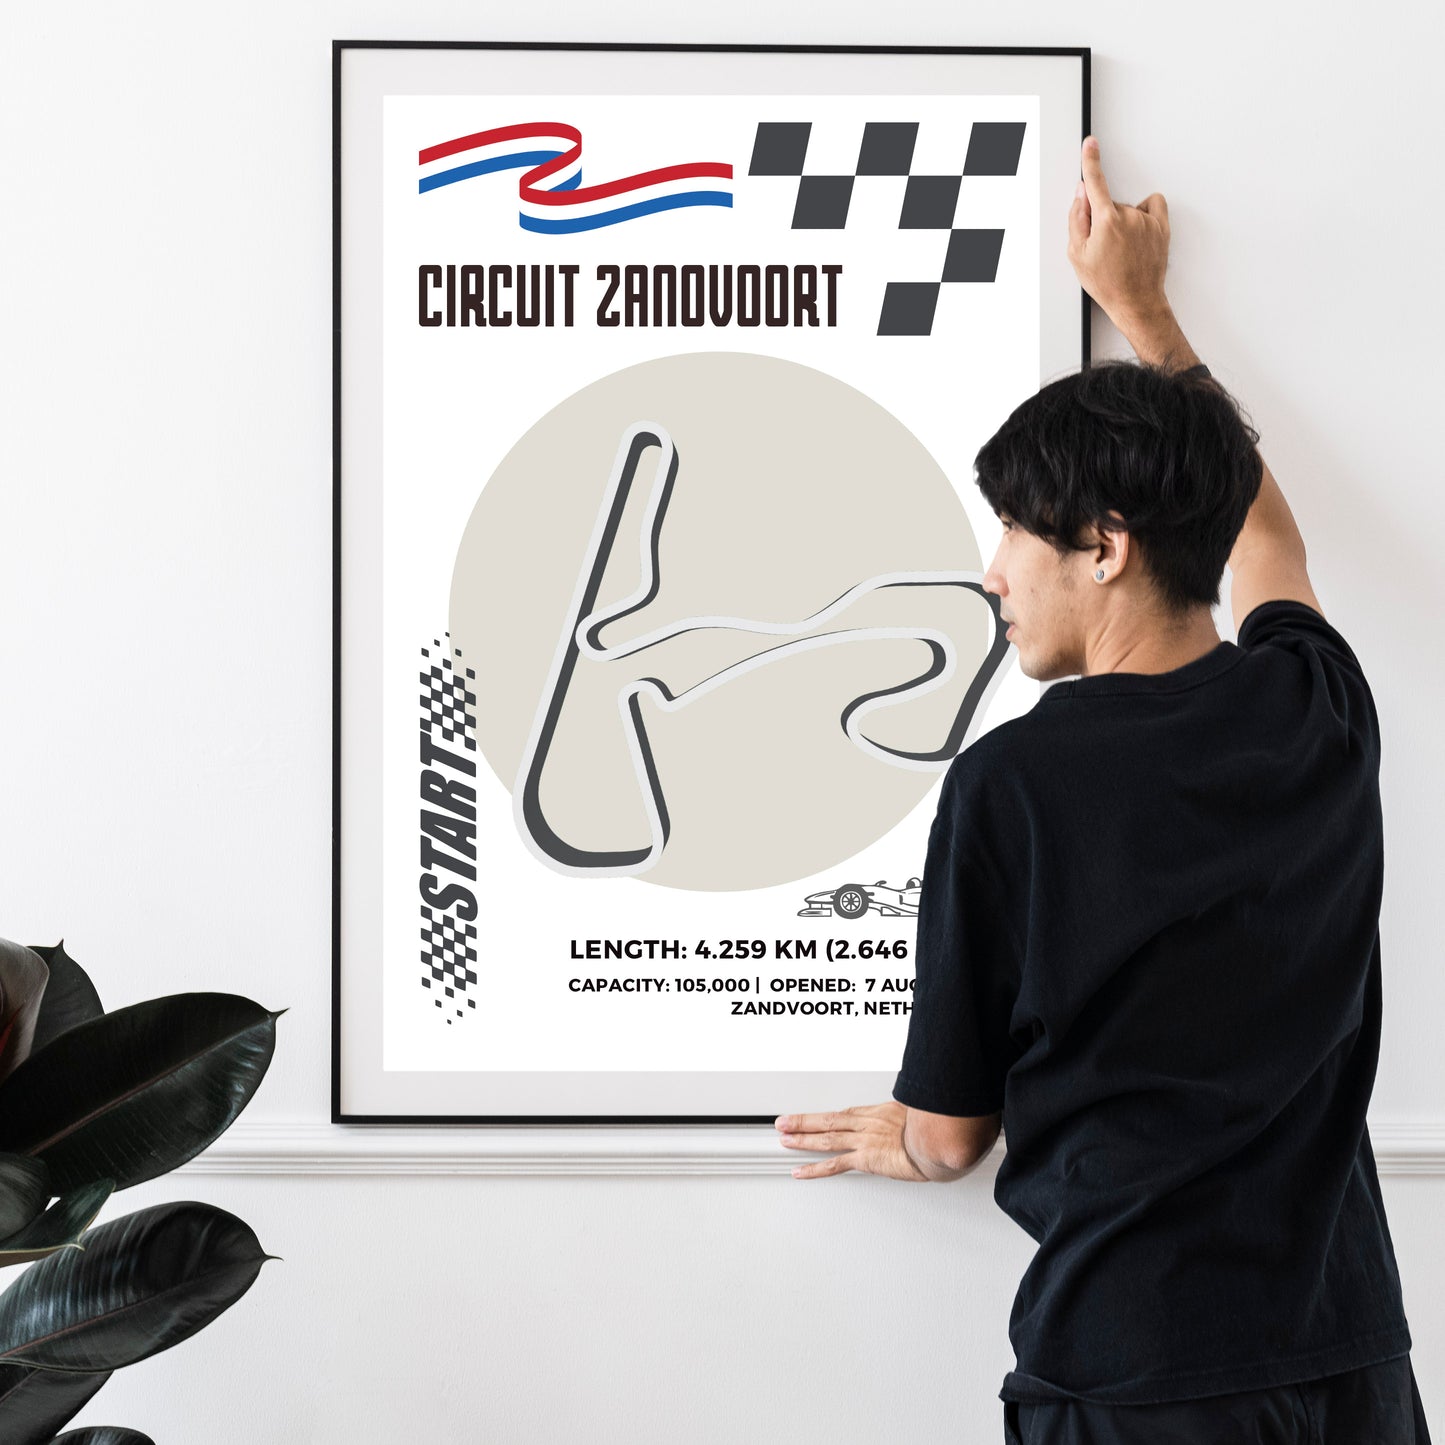 Get ready for the ultimate addition to your collection with Zandvoort Circuit F1 Posters. Printed on durable, age-resistant paper, each poster features a detailed map and guide of the famous Formula One racing tracks. Perfect for any true racing fan, these posters showcase the history, construction, country, and iconic moments of each circuit. Complete your display with our "Formula One Poster" for the ultimate racing experience.